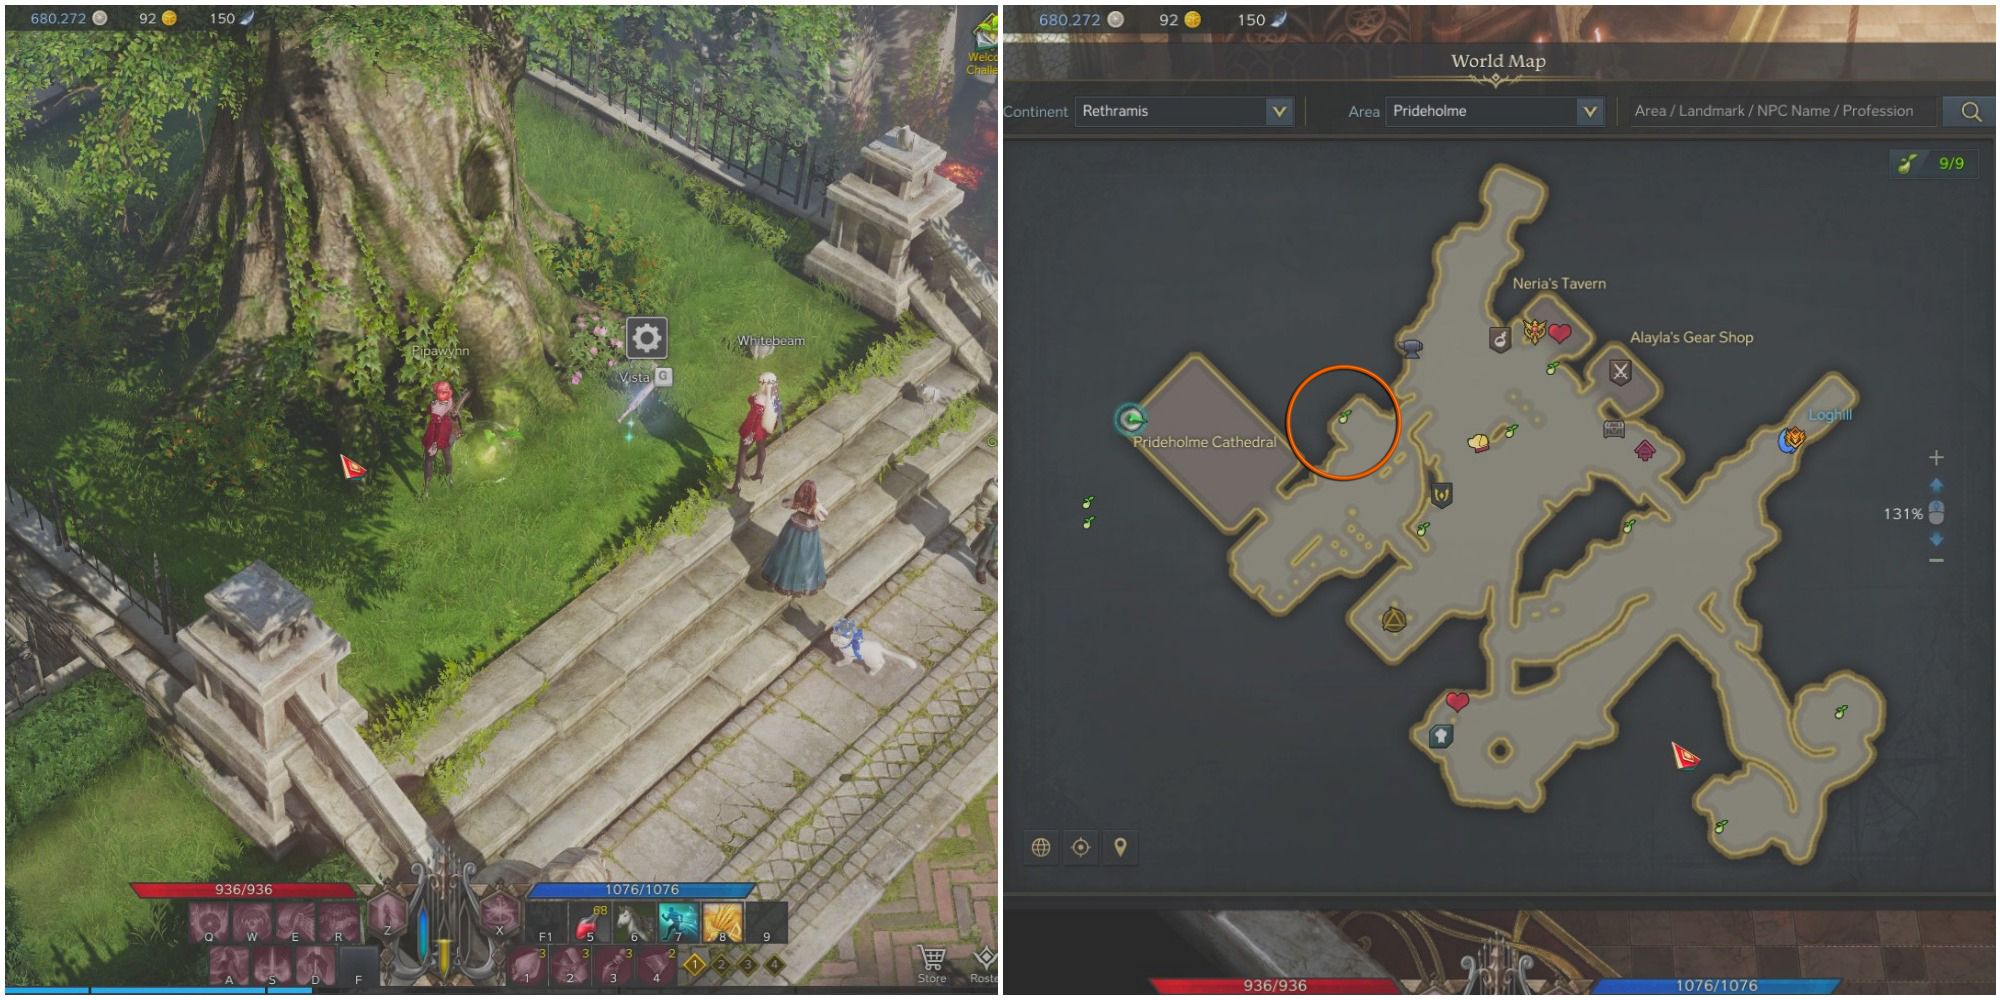 Split image of bard standing by mokoko seed at base of tree and a map of Prideholme